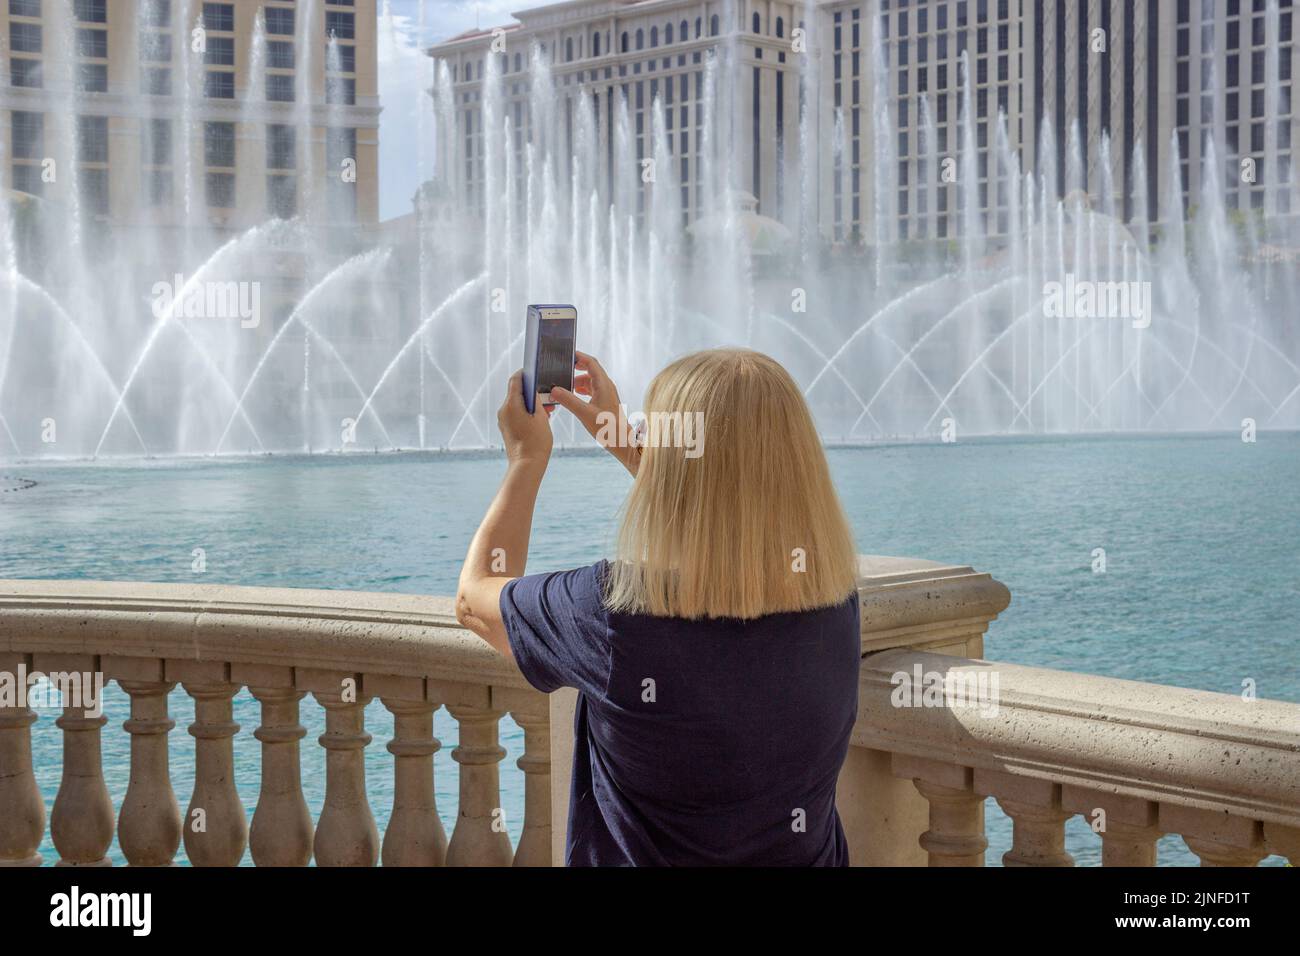 A woman taking vertical pictures with a cell phone of the water fountains at Bellagio Las Vegas Stock Photo